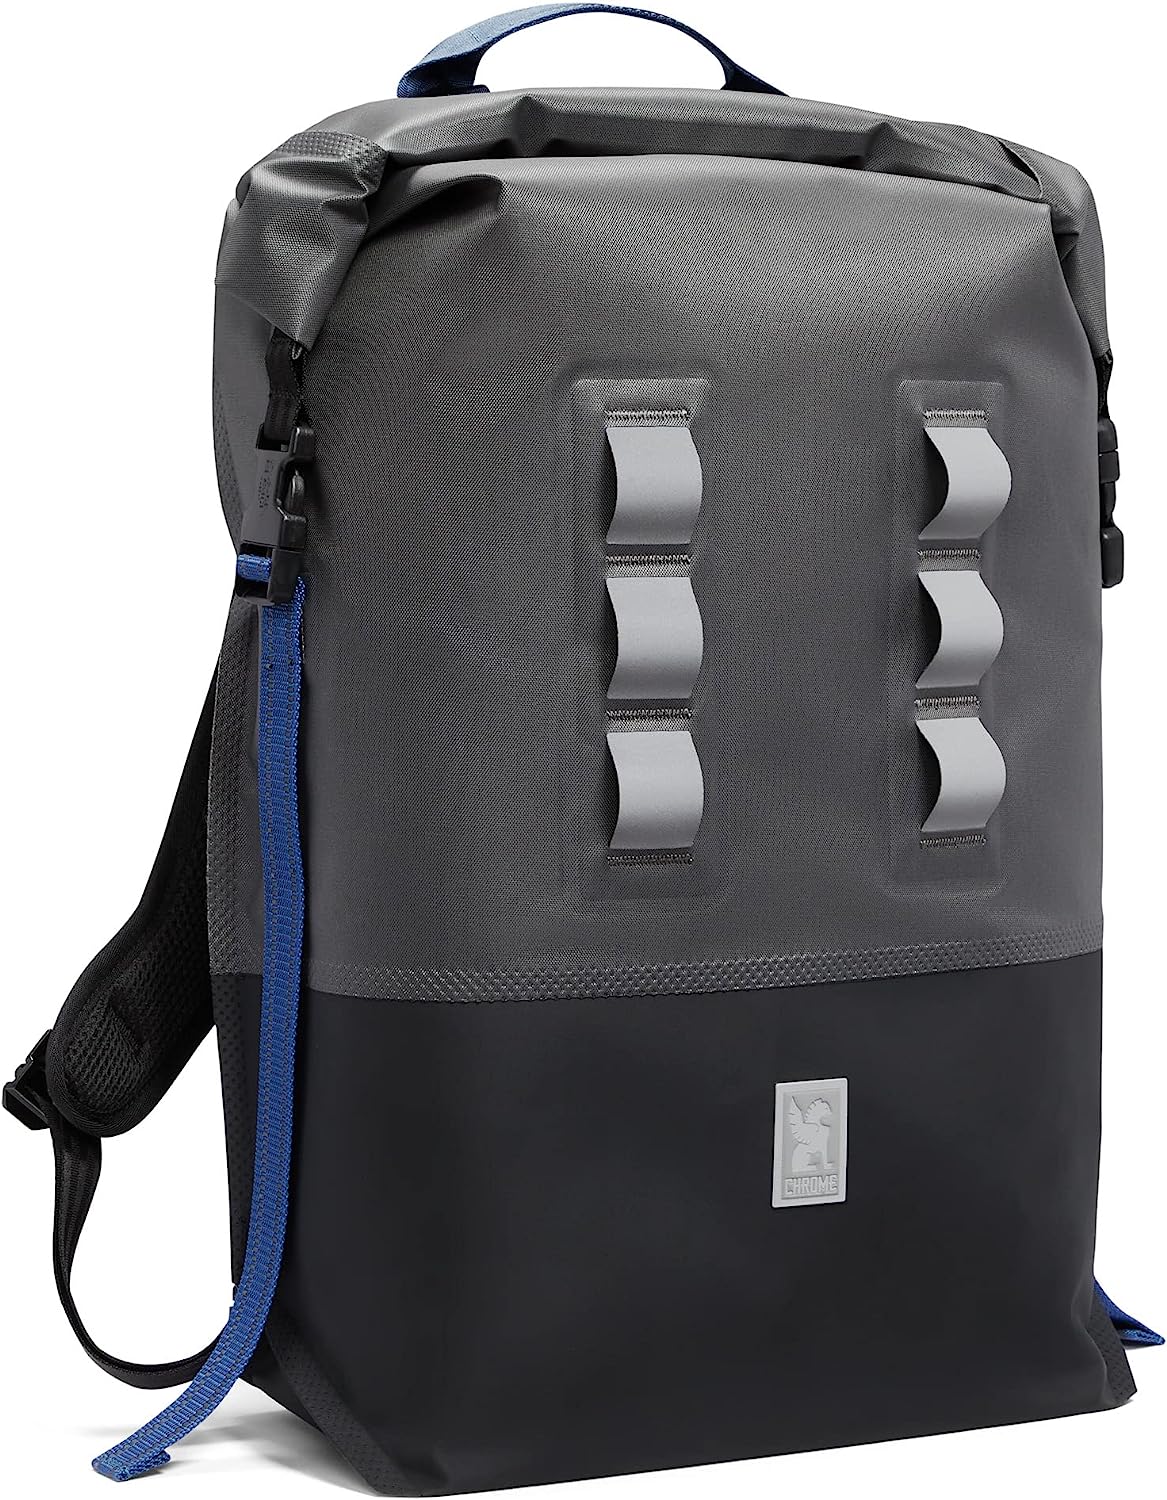 Chrome Industries Urban Ex 2.0 Rolltop Backpack- 15